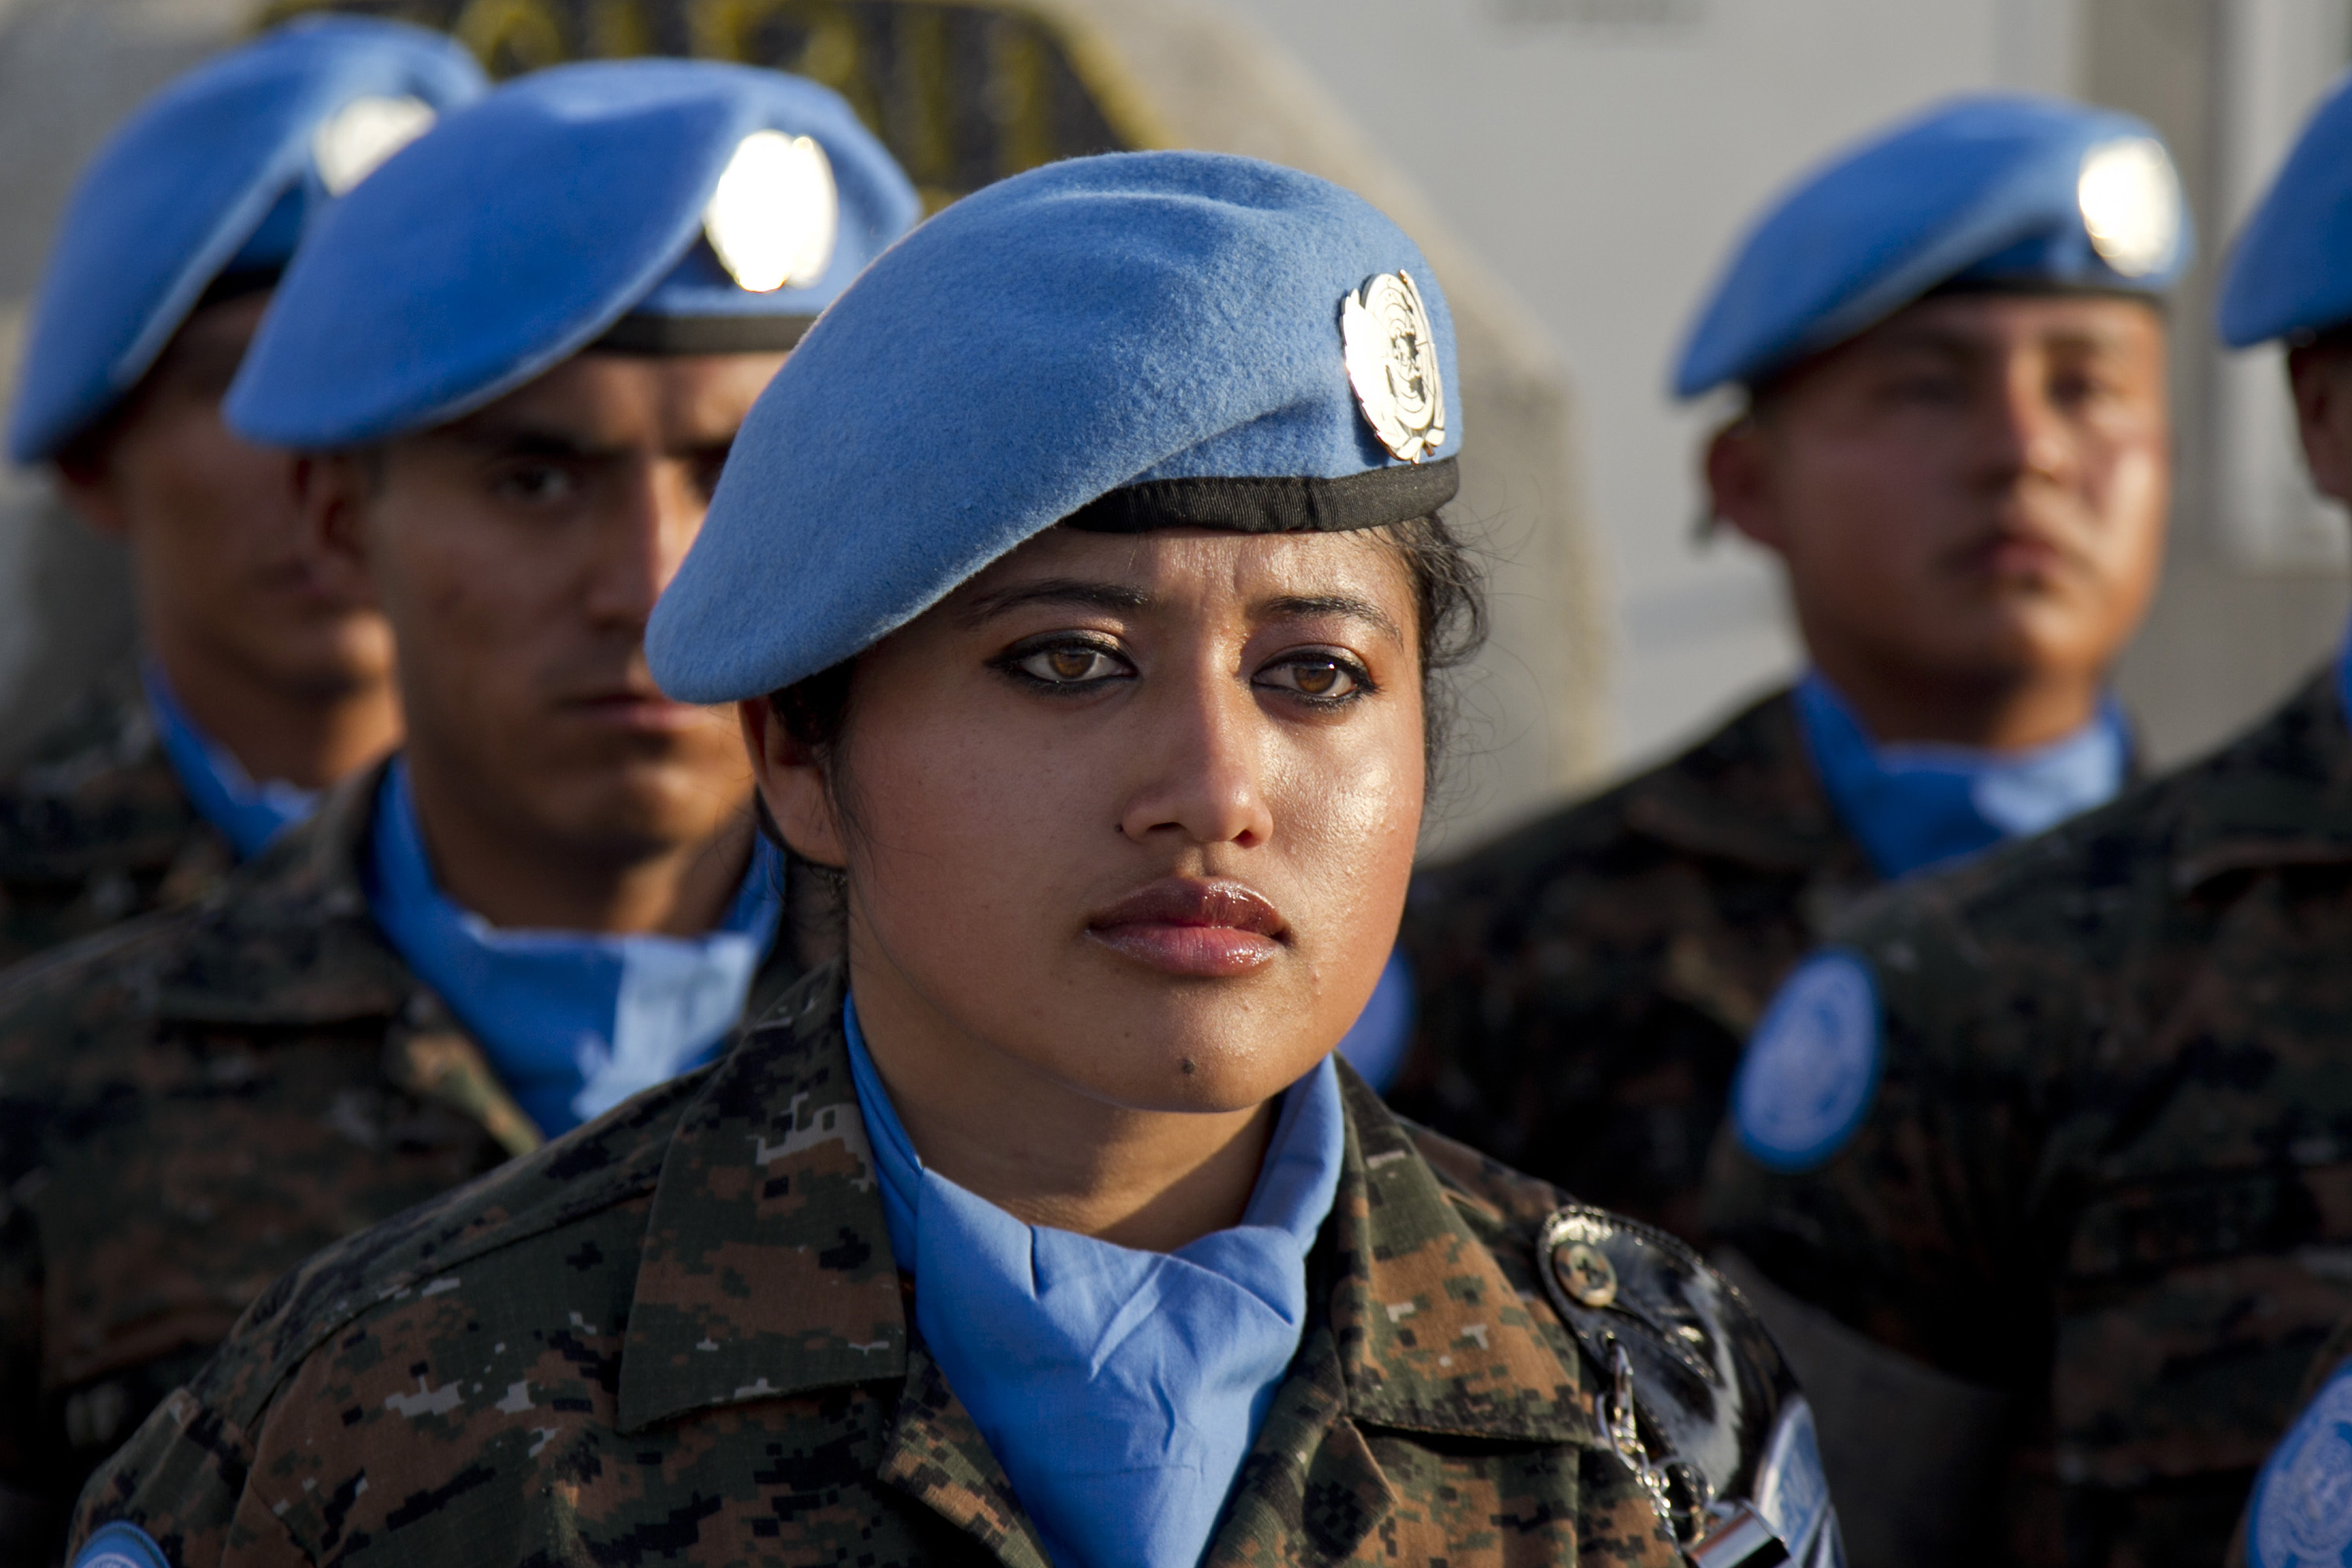 UN Peacekeeping - Current Affairs